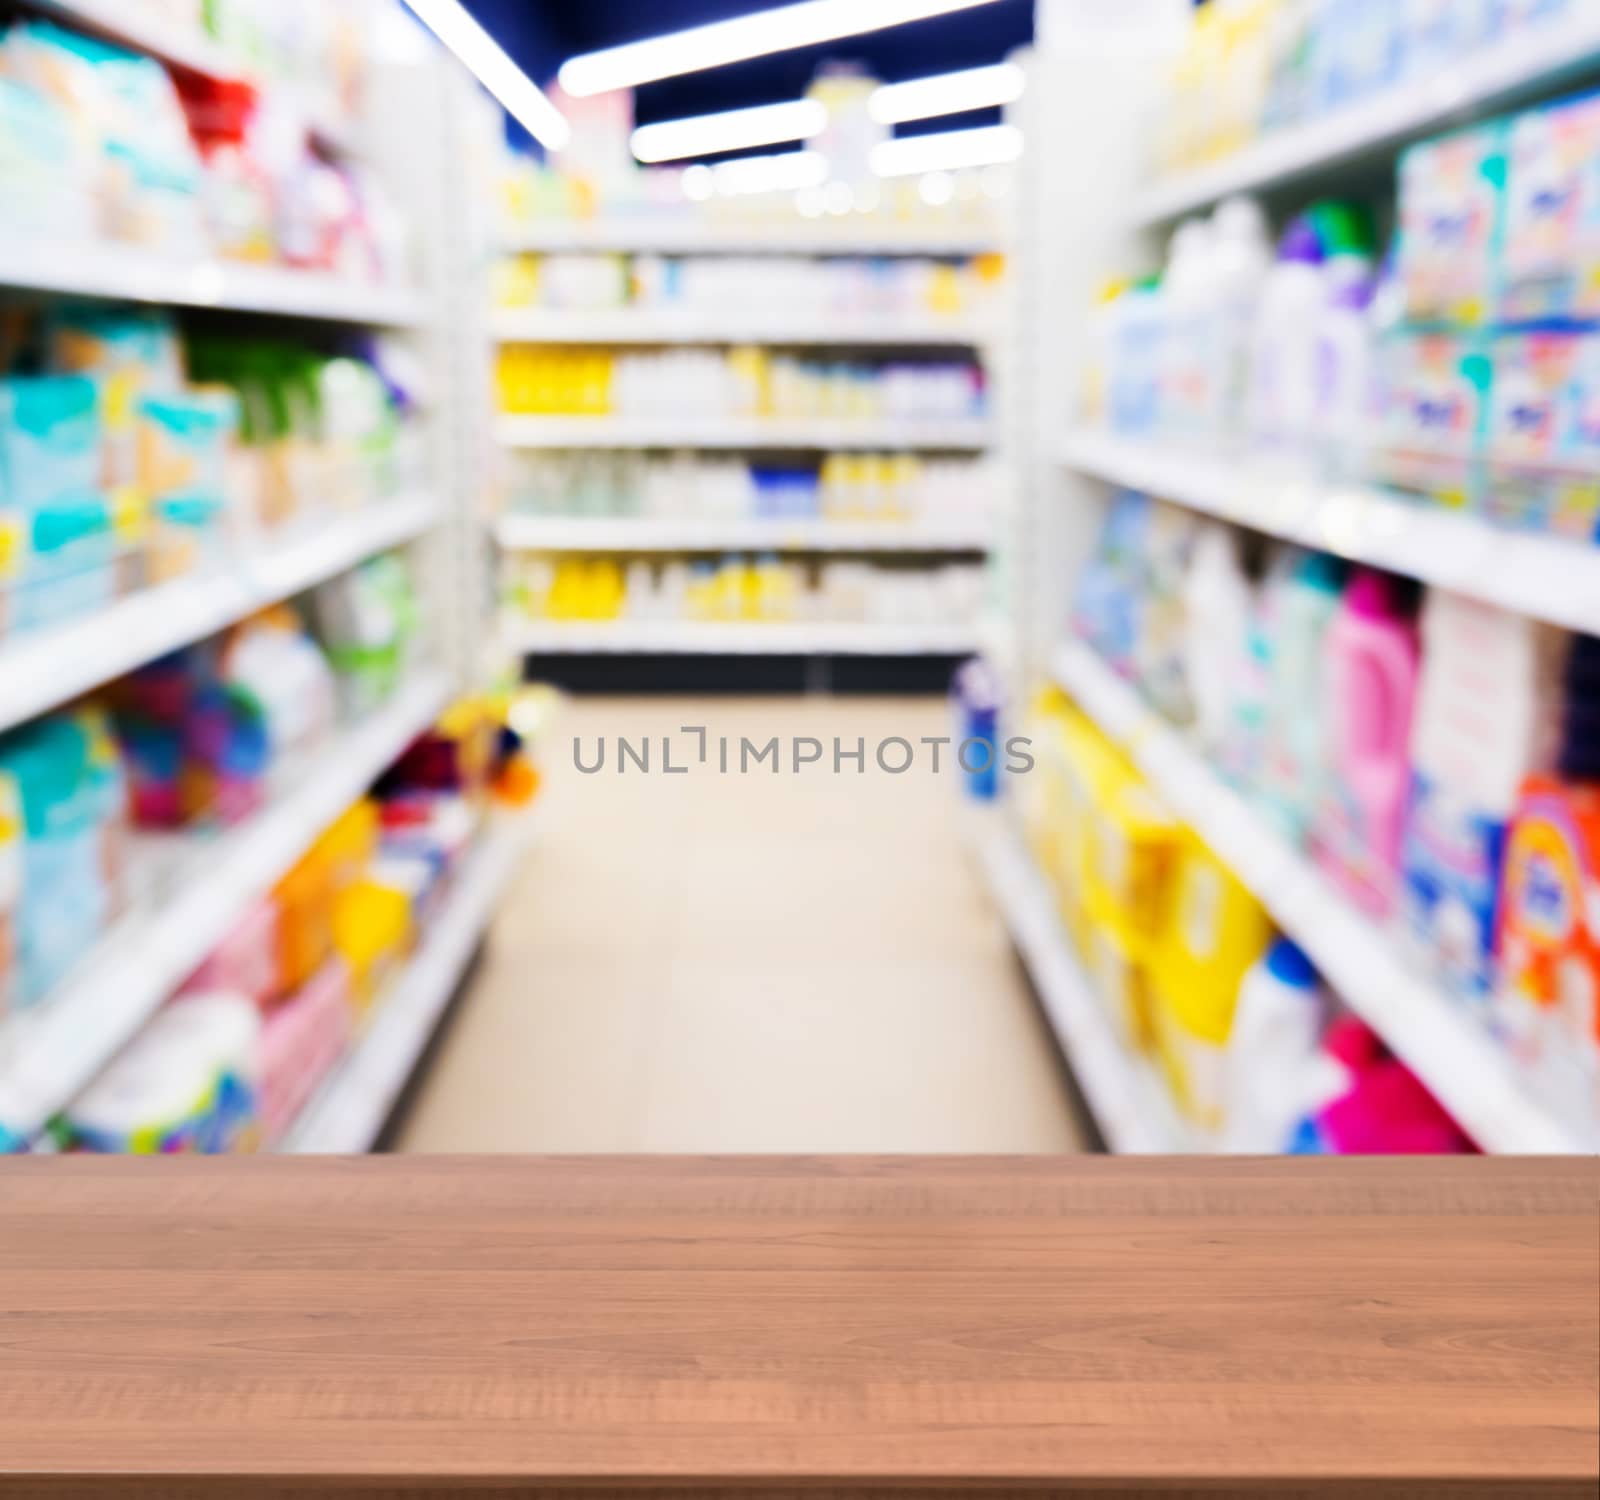 Wooden board empty table in front of blurred background. Perspective dark wood table over blur in kids toy store. Mock up for display or montage your product.